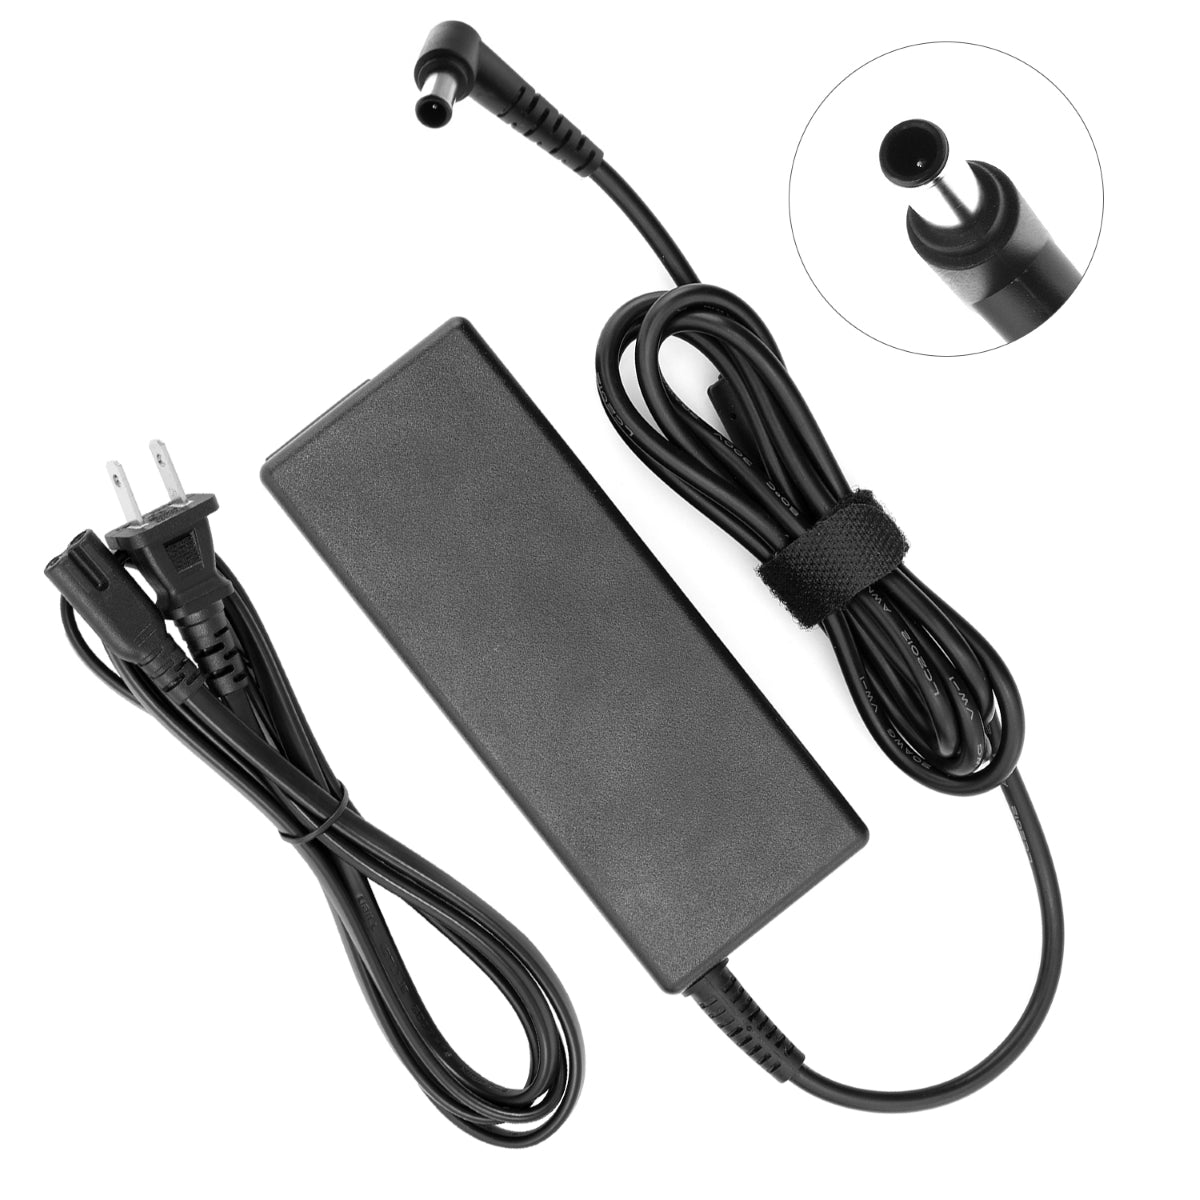 Power Adapter for LG 34WL75C-B Monitor TV